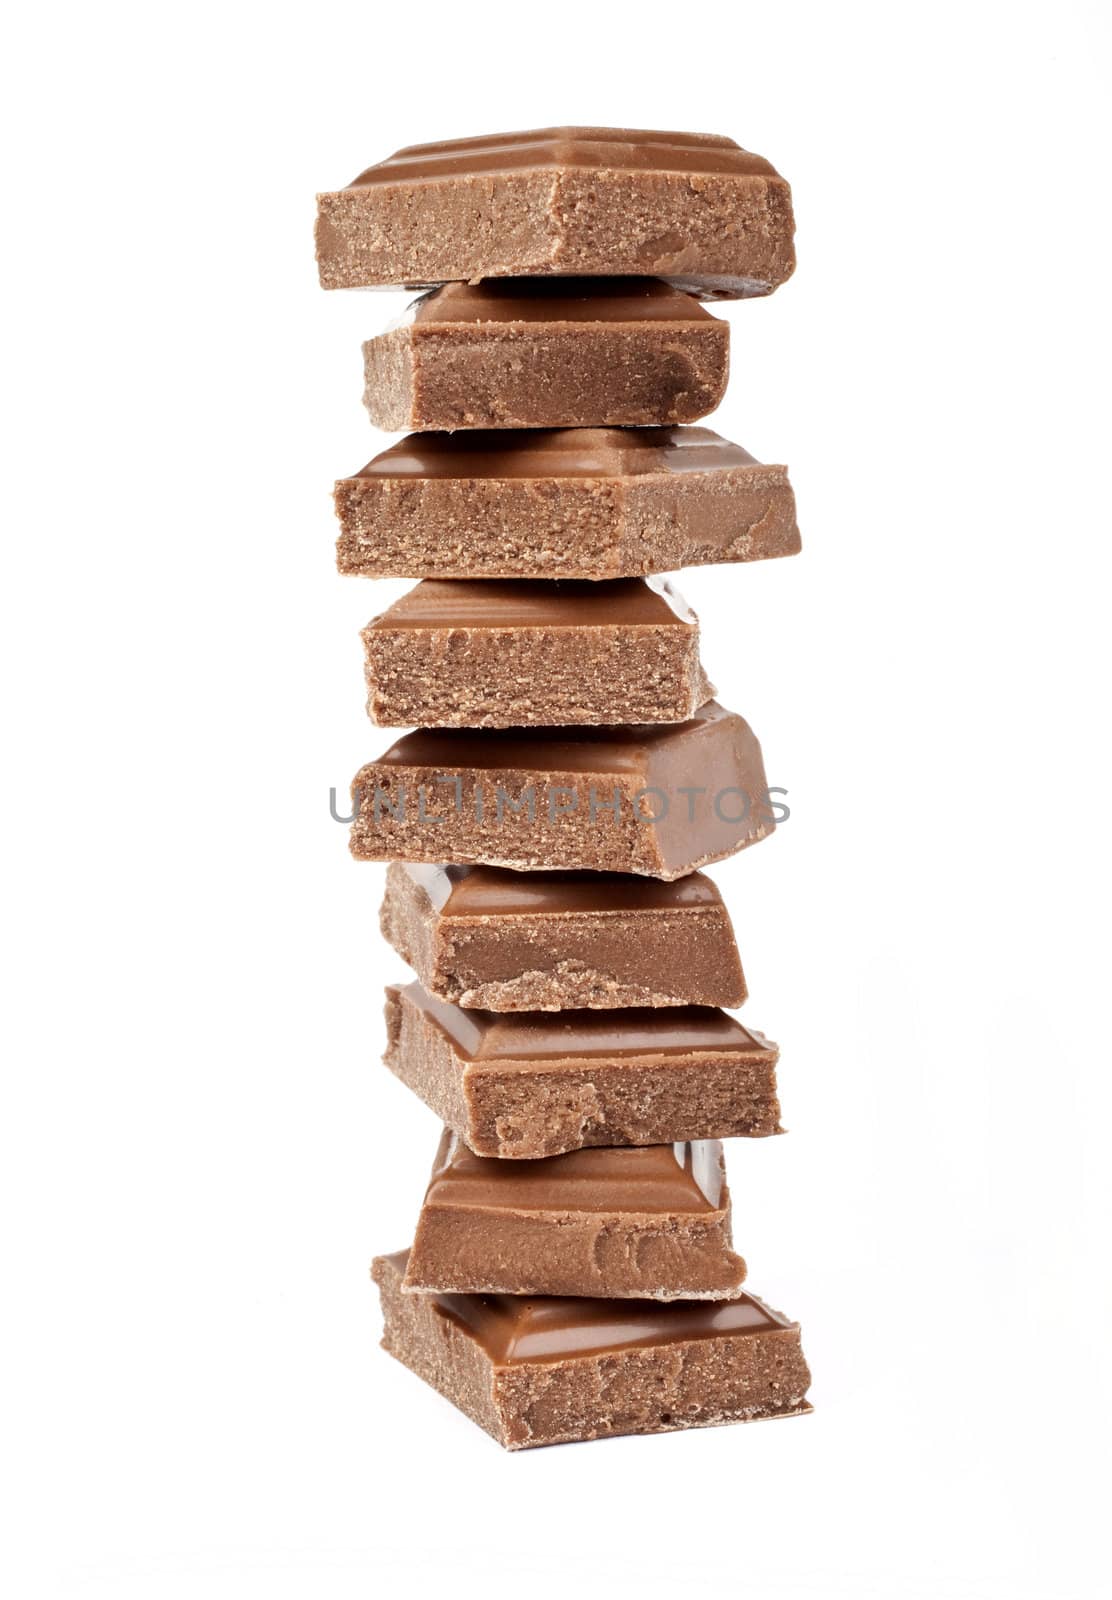 Chunks of Chocolate piled up in front of a white background.